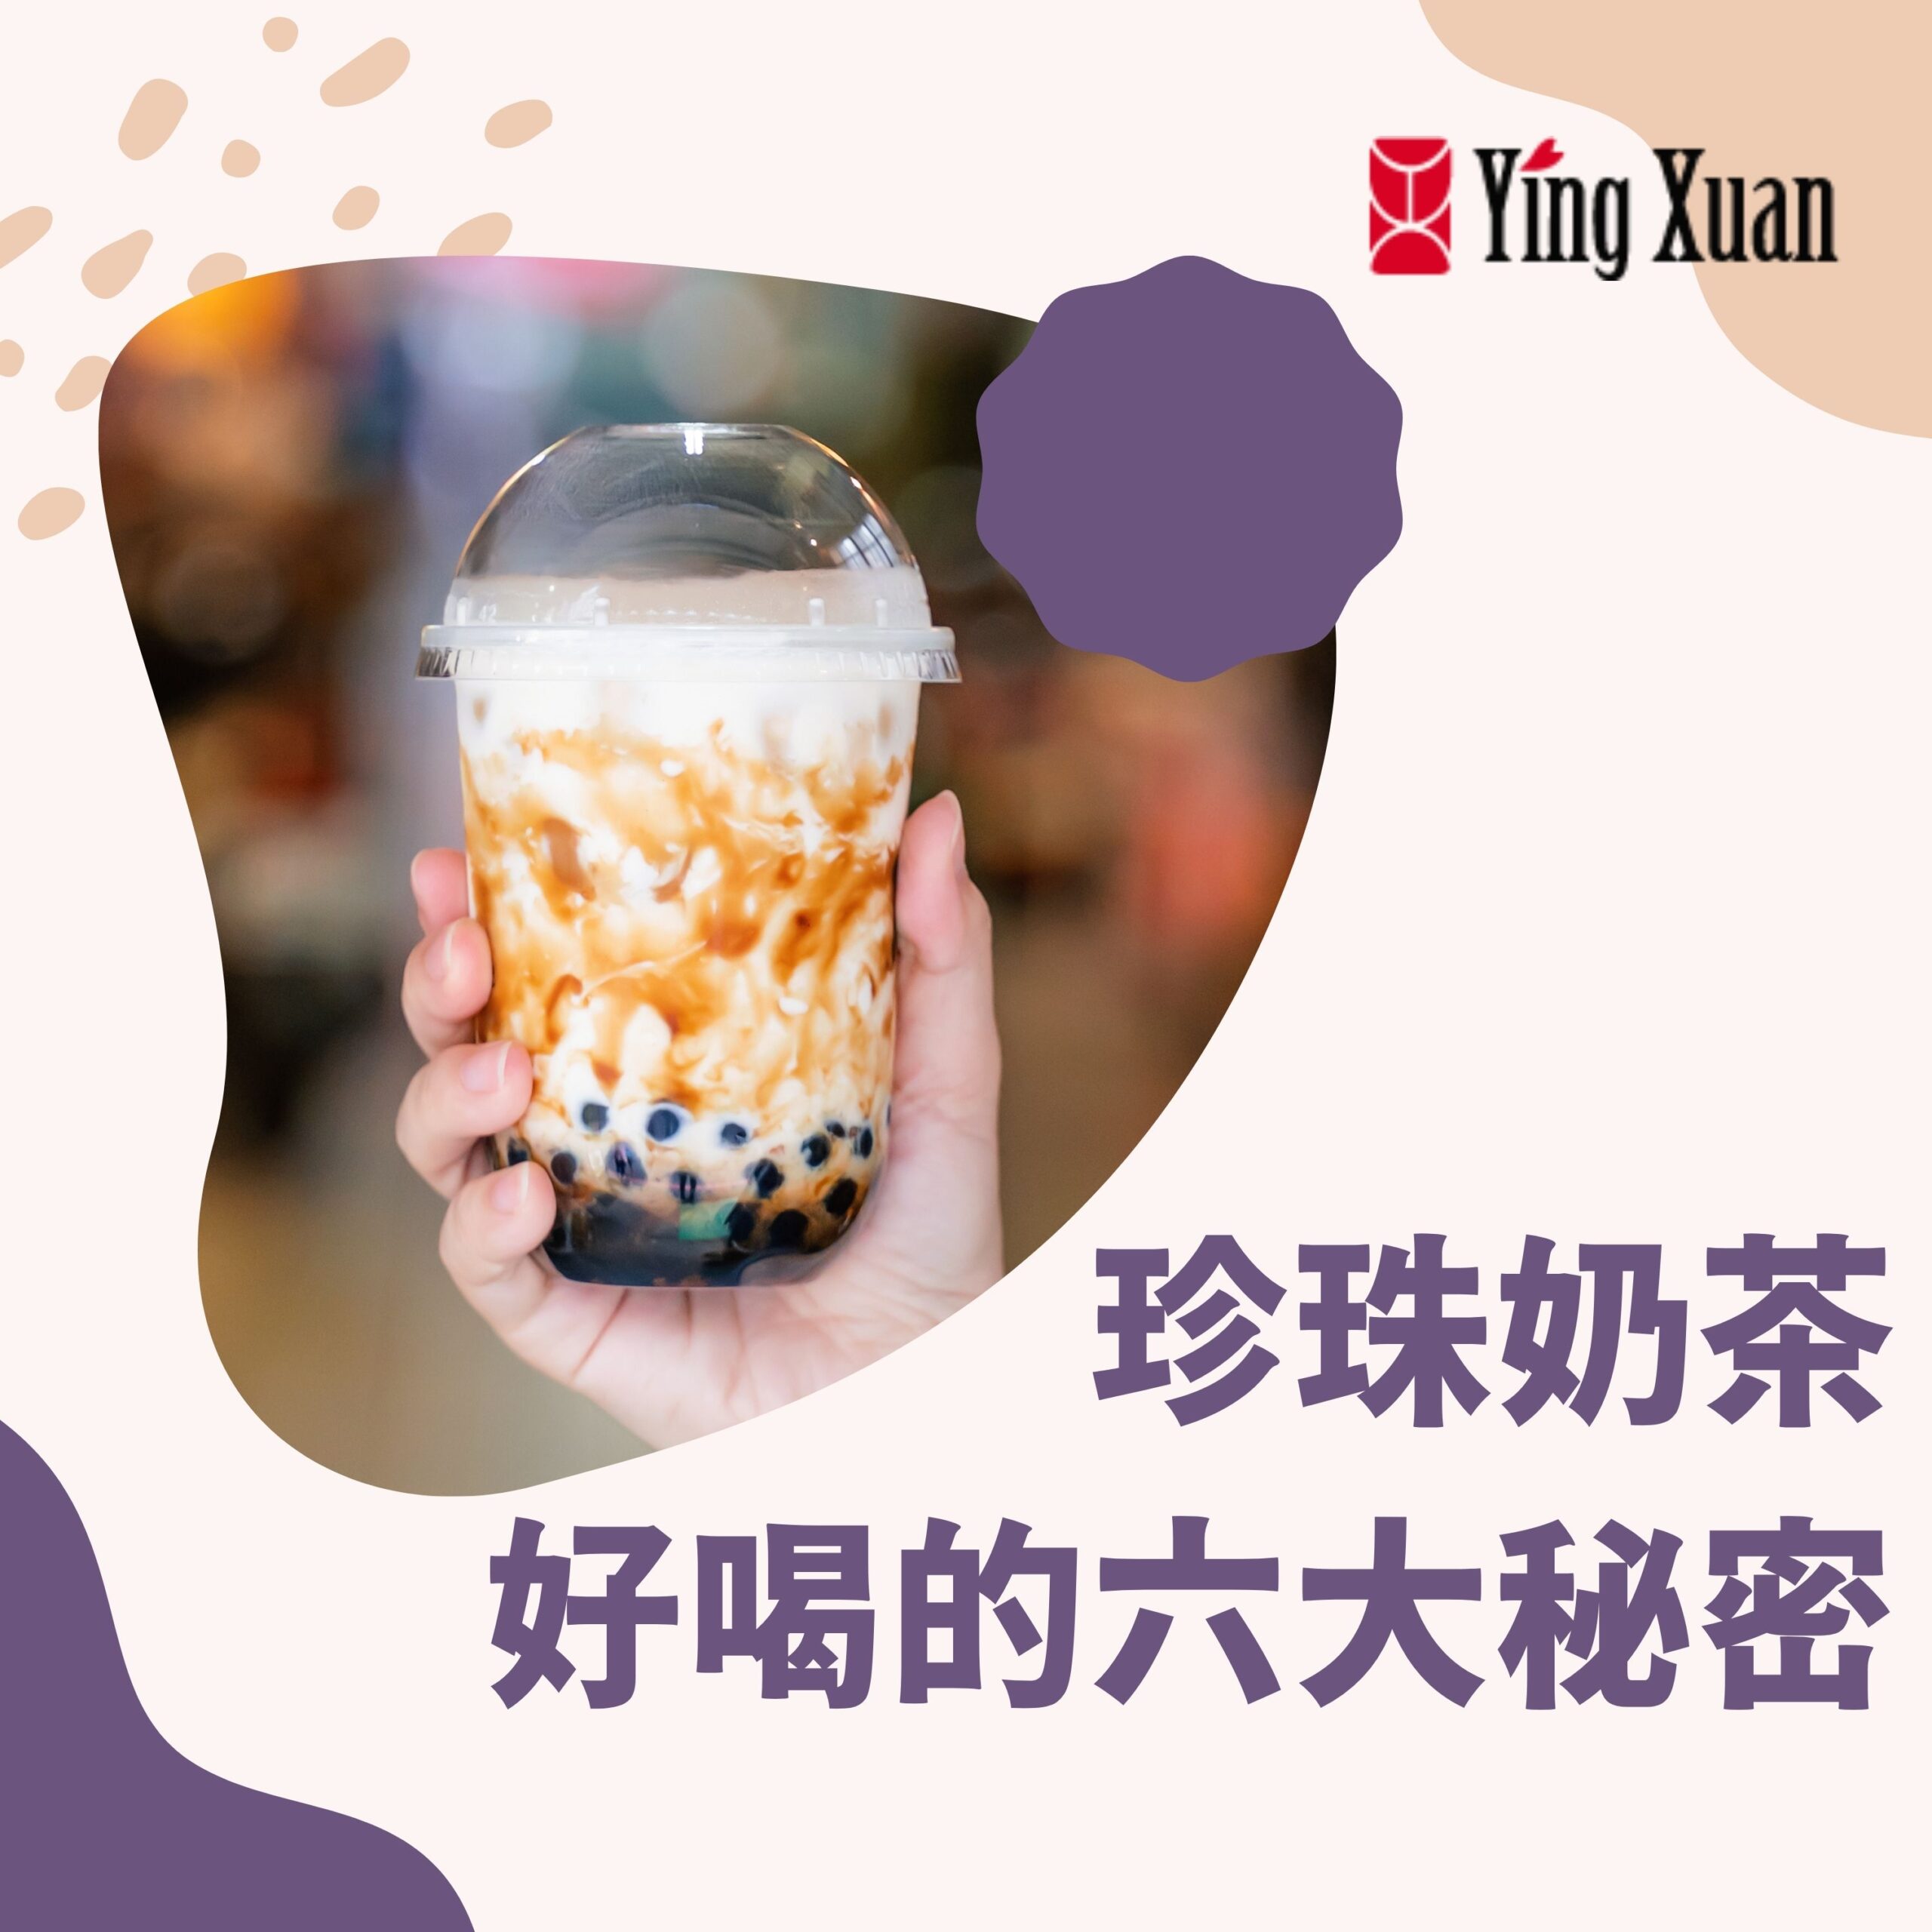 The 6 Secrets Behind the Deliciousness of Bubble Milk Tea